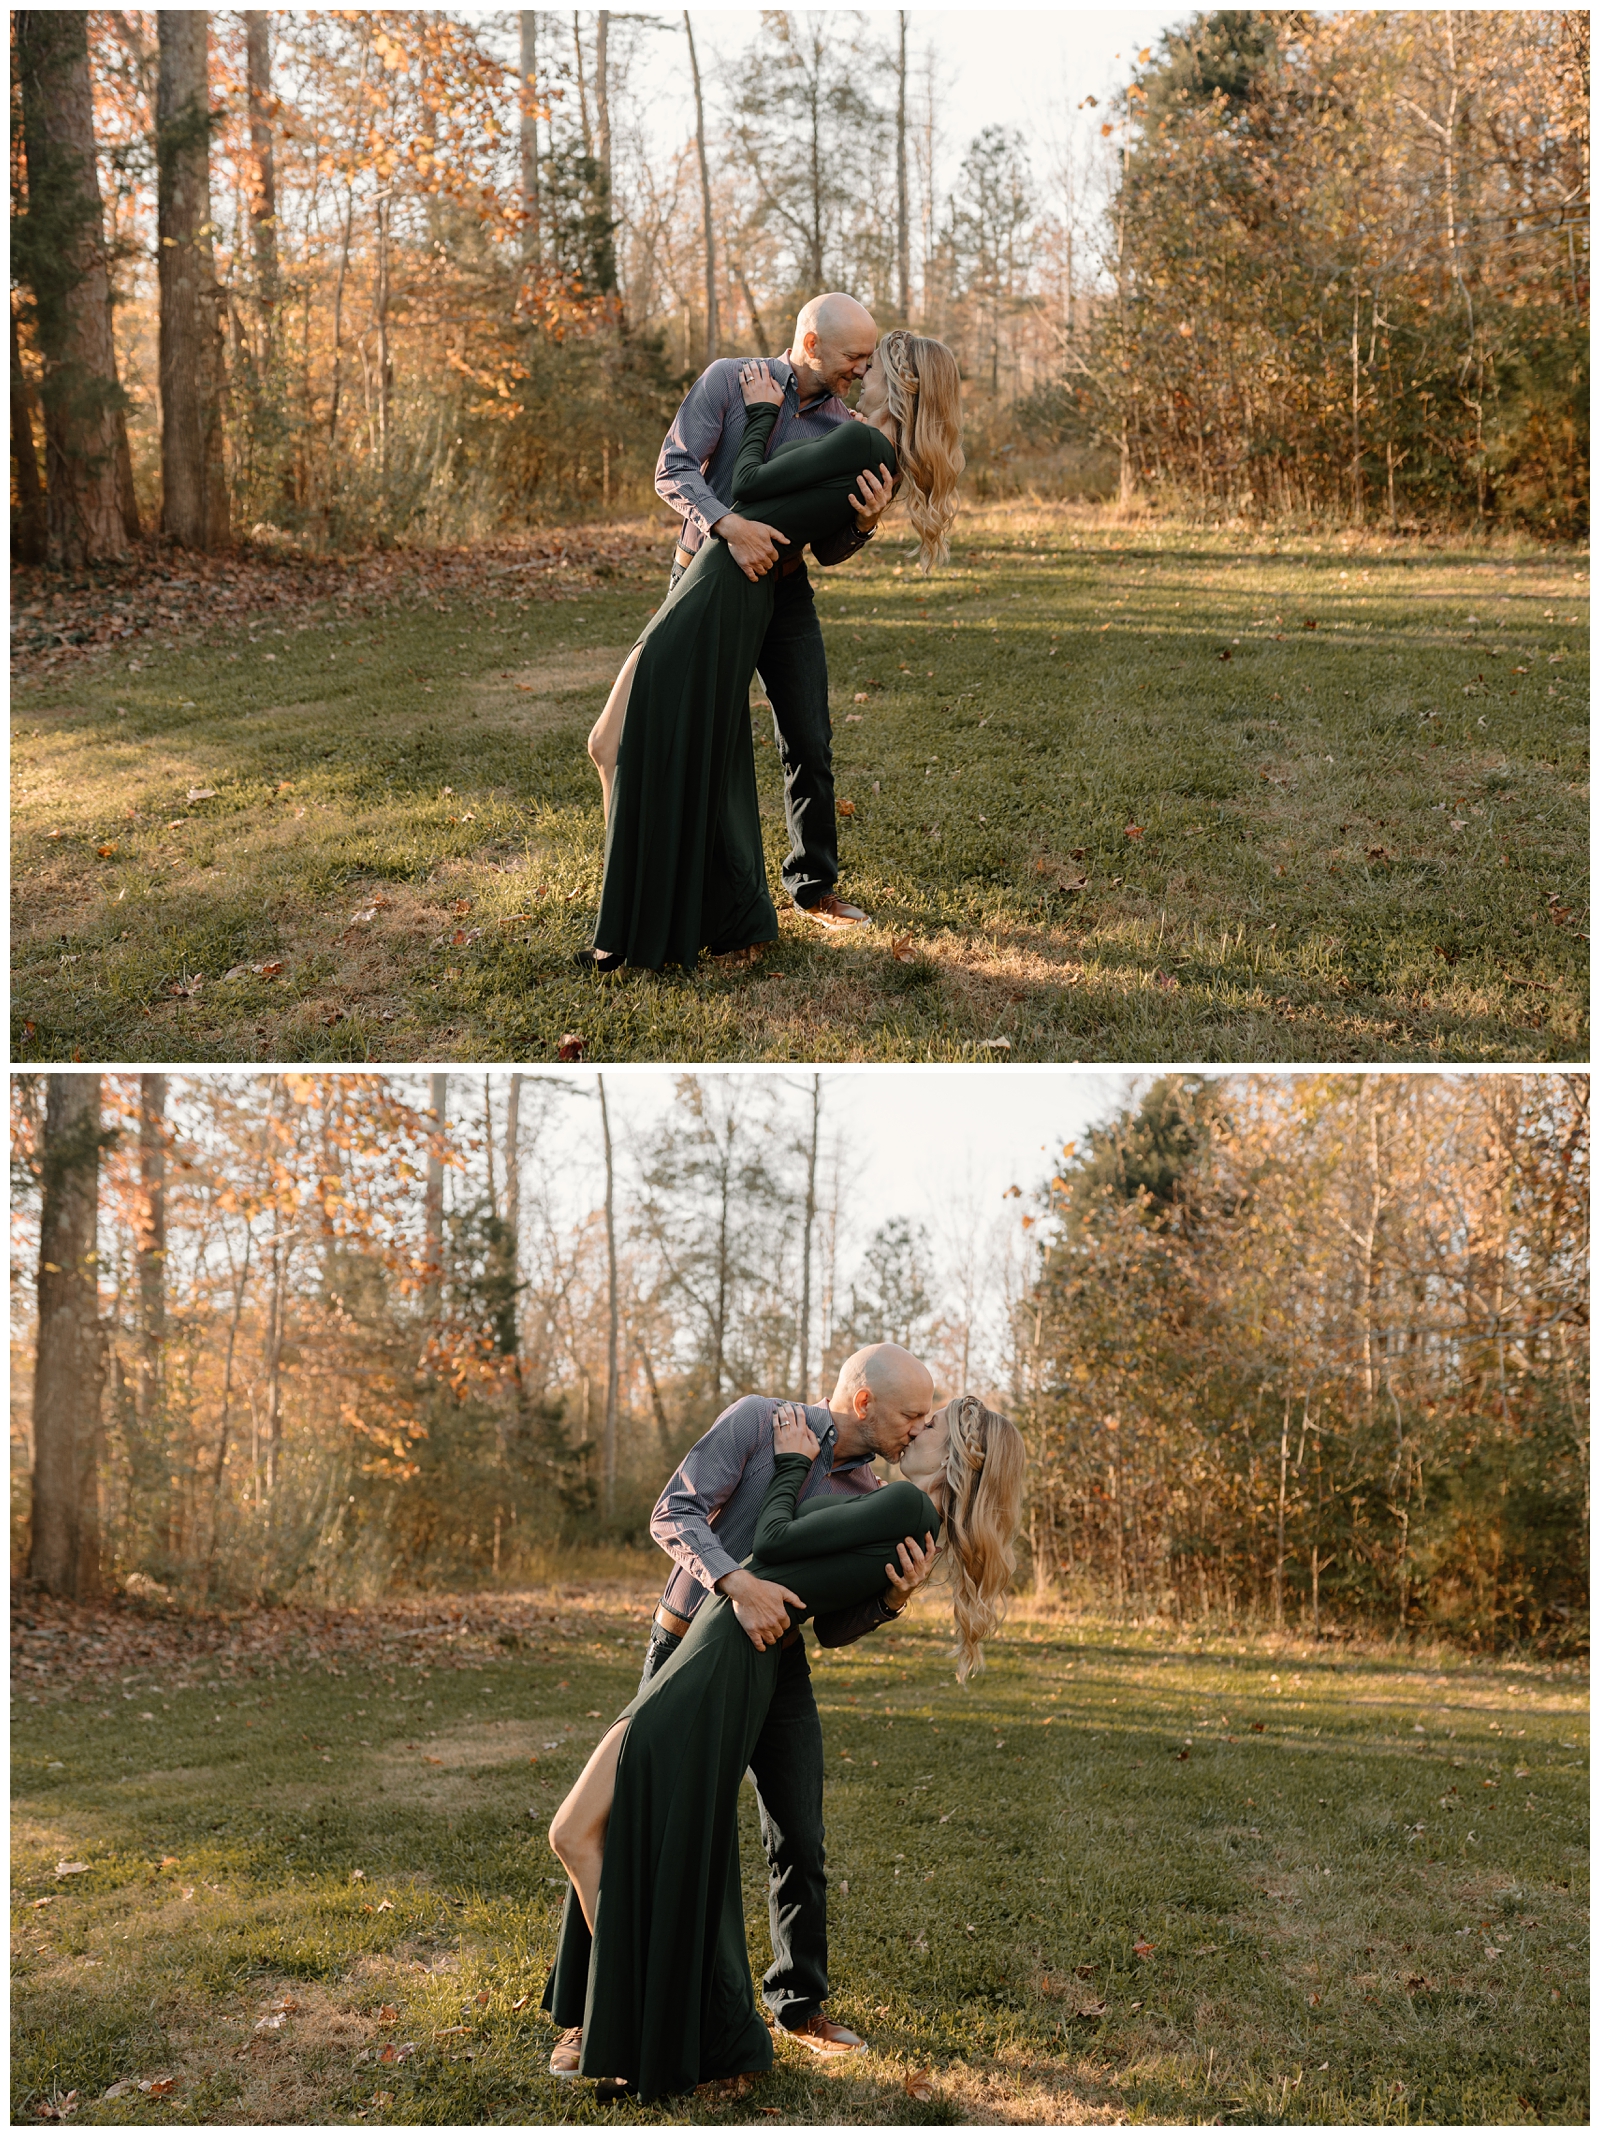 Romantic dip kiss at carefree engagement session in Greensboro by Winston-Salem NC wedding photographer